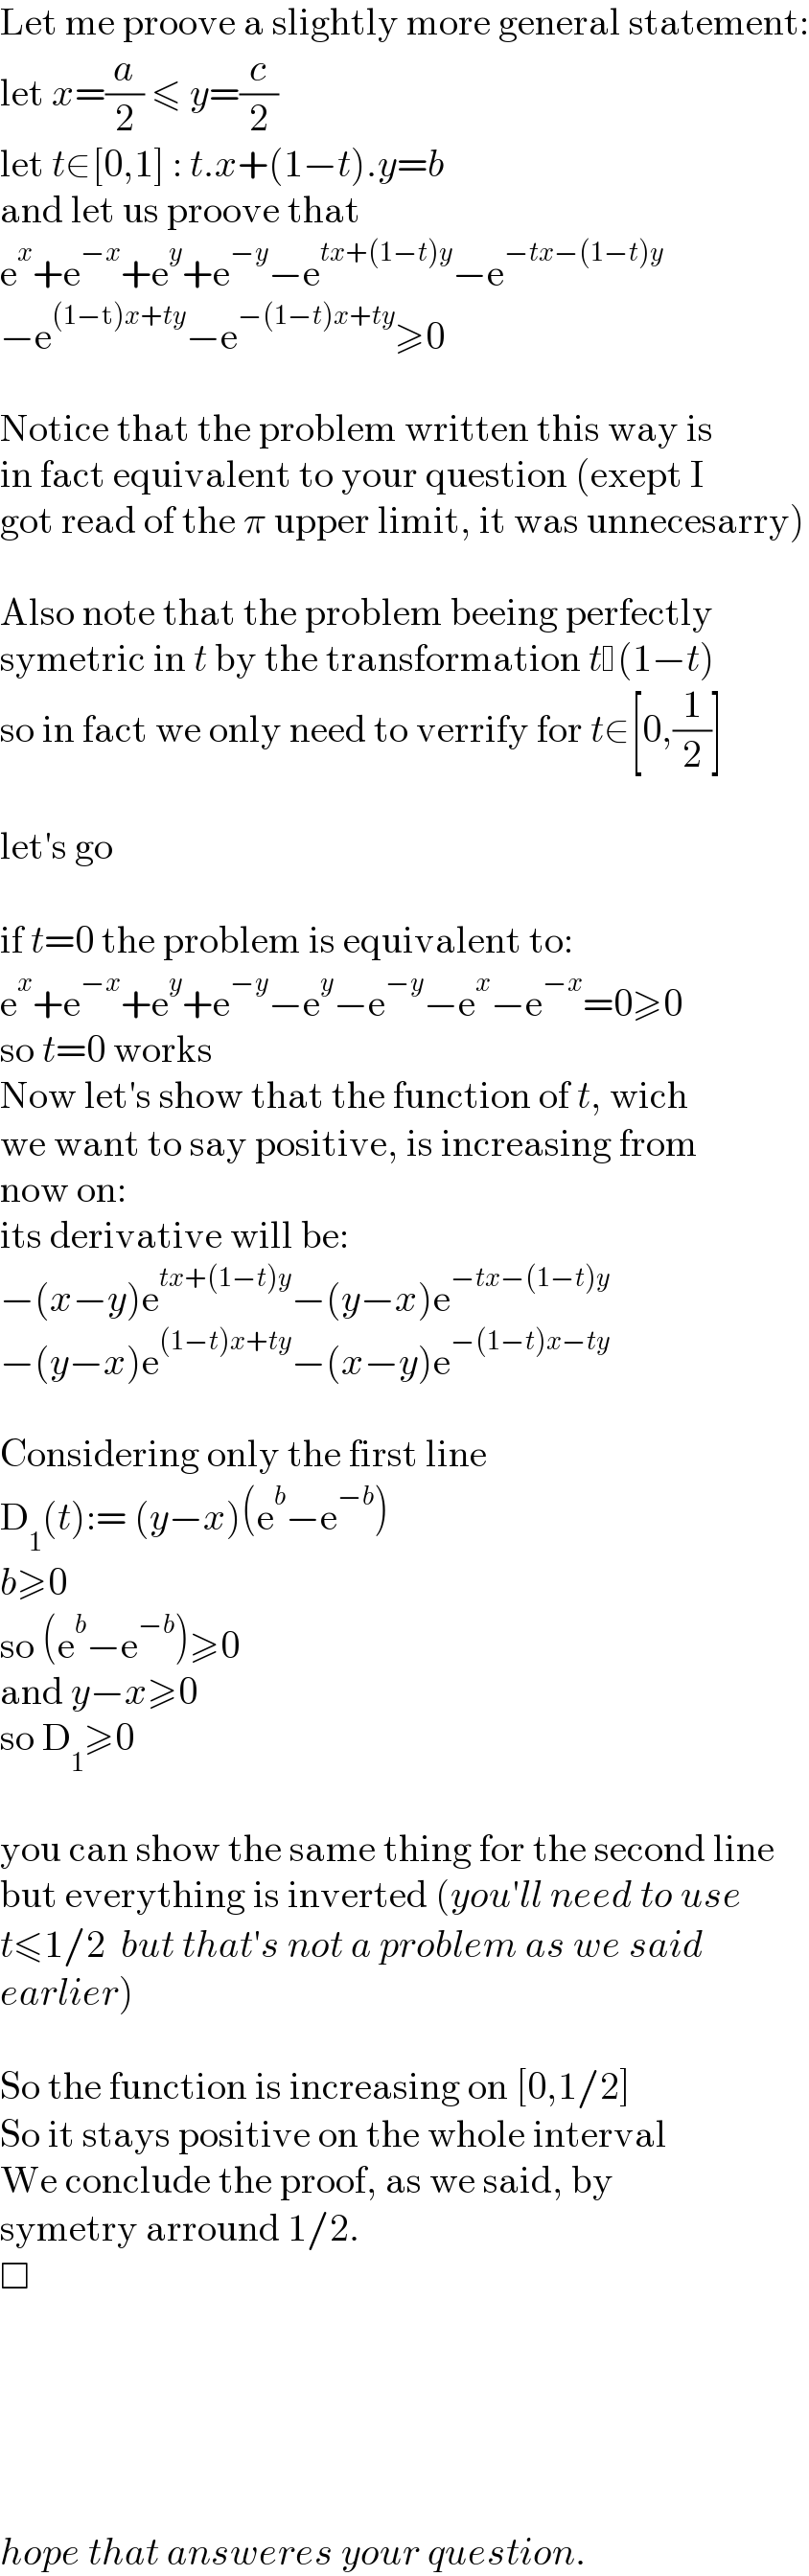 Let me proove a slightly more general statement:  let x=(a/2) ≤ y=(c/2)   let t∈[0,1] : t.x+(1−t).y=b  and let us proove that  e^x +e^(−x) +e^y +e^(−y) −e^(tx+(1−t)y) −e^(−tx−(1−t)y)   −e^((1−t)x+ty) −e^(−(1−t)x+ty) ≥0    Notice that the problem written this way is  in fact equivalent to your question (exept I  got read of the π upper limit, it was unnecesarry)    Also note that the problem beeing perfectly  symetric in t by the transformation t (1−t)  so in fact we only need to verrify for t∈[0,(1/2)]    let′s go    if t=0 the problem is equivalent to:  e^x +e^(−x) +e^y +e^(−y) −e^y −e^(−y) −e^x −e^(−x) =0≥0  so t=0 works  Now let′s show that the function of t, wich  we want to say positive, is increasing from  now on:  its derivative will be:  −(x−y)e^(tx+(1−t)y) −(y−x)e^(−tx−(1−t)y)   −(y−x)e^((1−t)x+ty) −(x−y)e^(−(1−t)x−ty)     Considering only the first line  D_1 (t):= (y−x)(e^b −e^(−b) )  b≥0  so (e^b −e^(−b) )≥0  and y−x≥0  so D_1 ≥0    you can show the same thing for the second line  but everything is inverted (you′ll need to use  t≤1/2  but that′s not a problem as we said   earlier)    So the function is increasing on [0,1/2]  So it stays positive on the whole interval  We conclude the proof, as we said, by   symetry arround 1/2.  □            hope that answeres your question.  